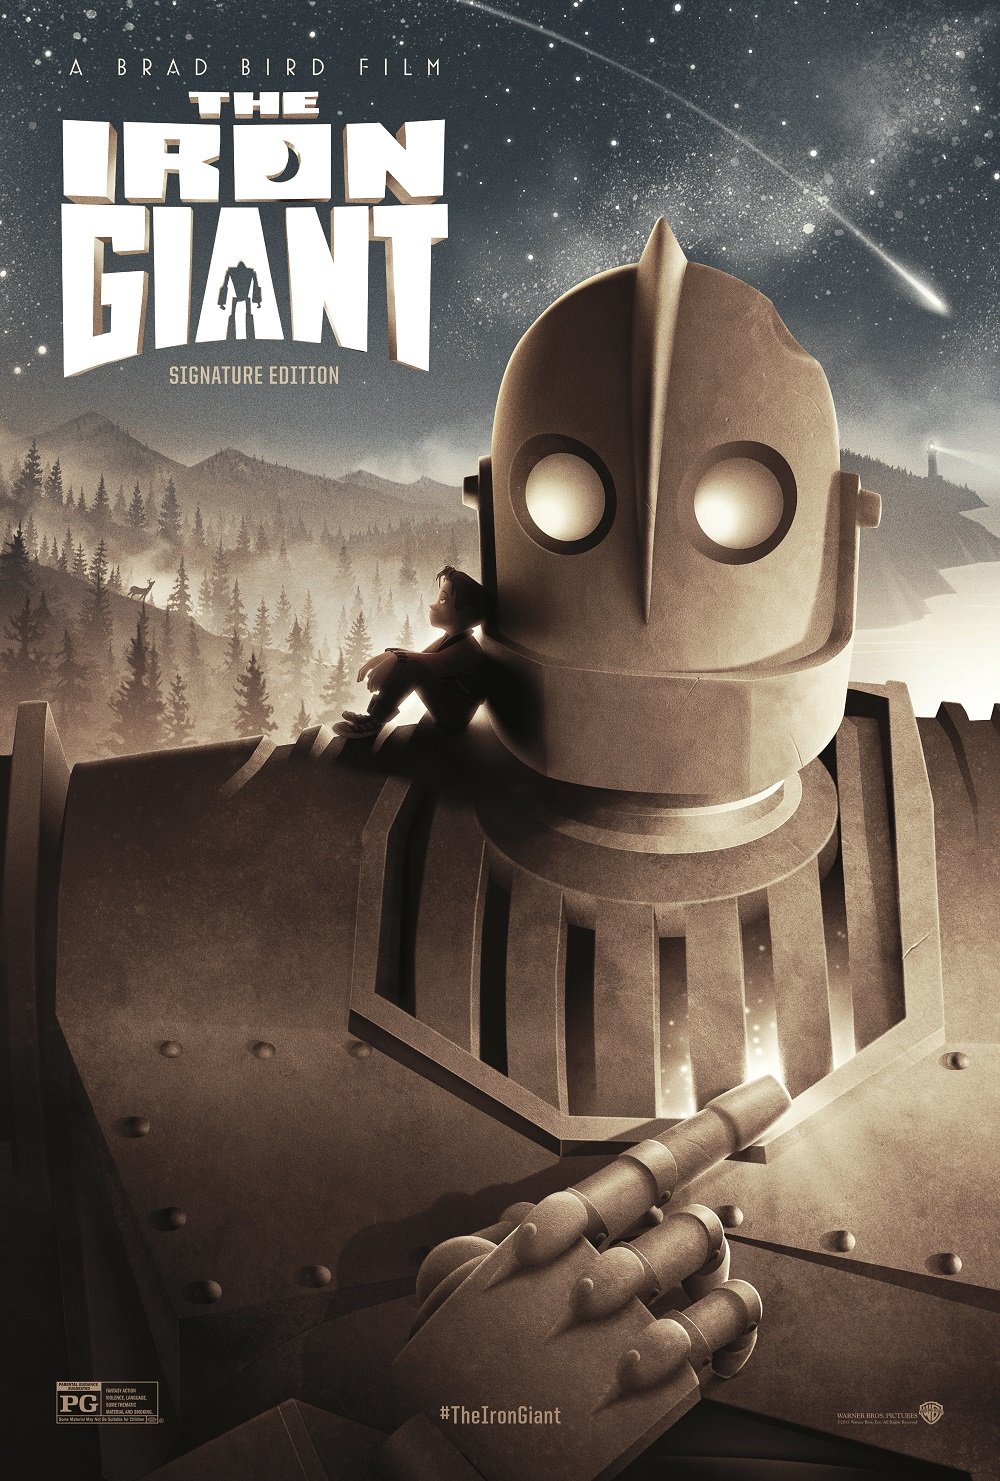 THE IRON GIANT - Movieguide | Movie Reviews for Christians